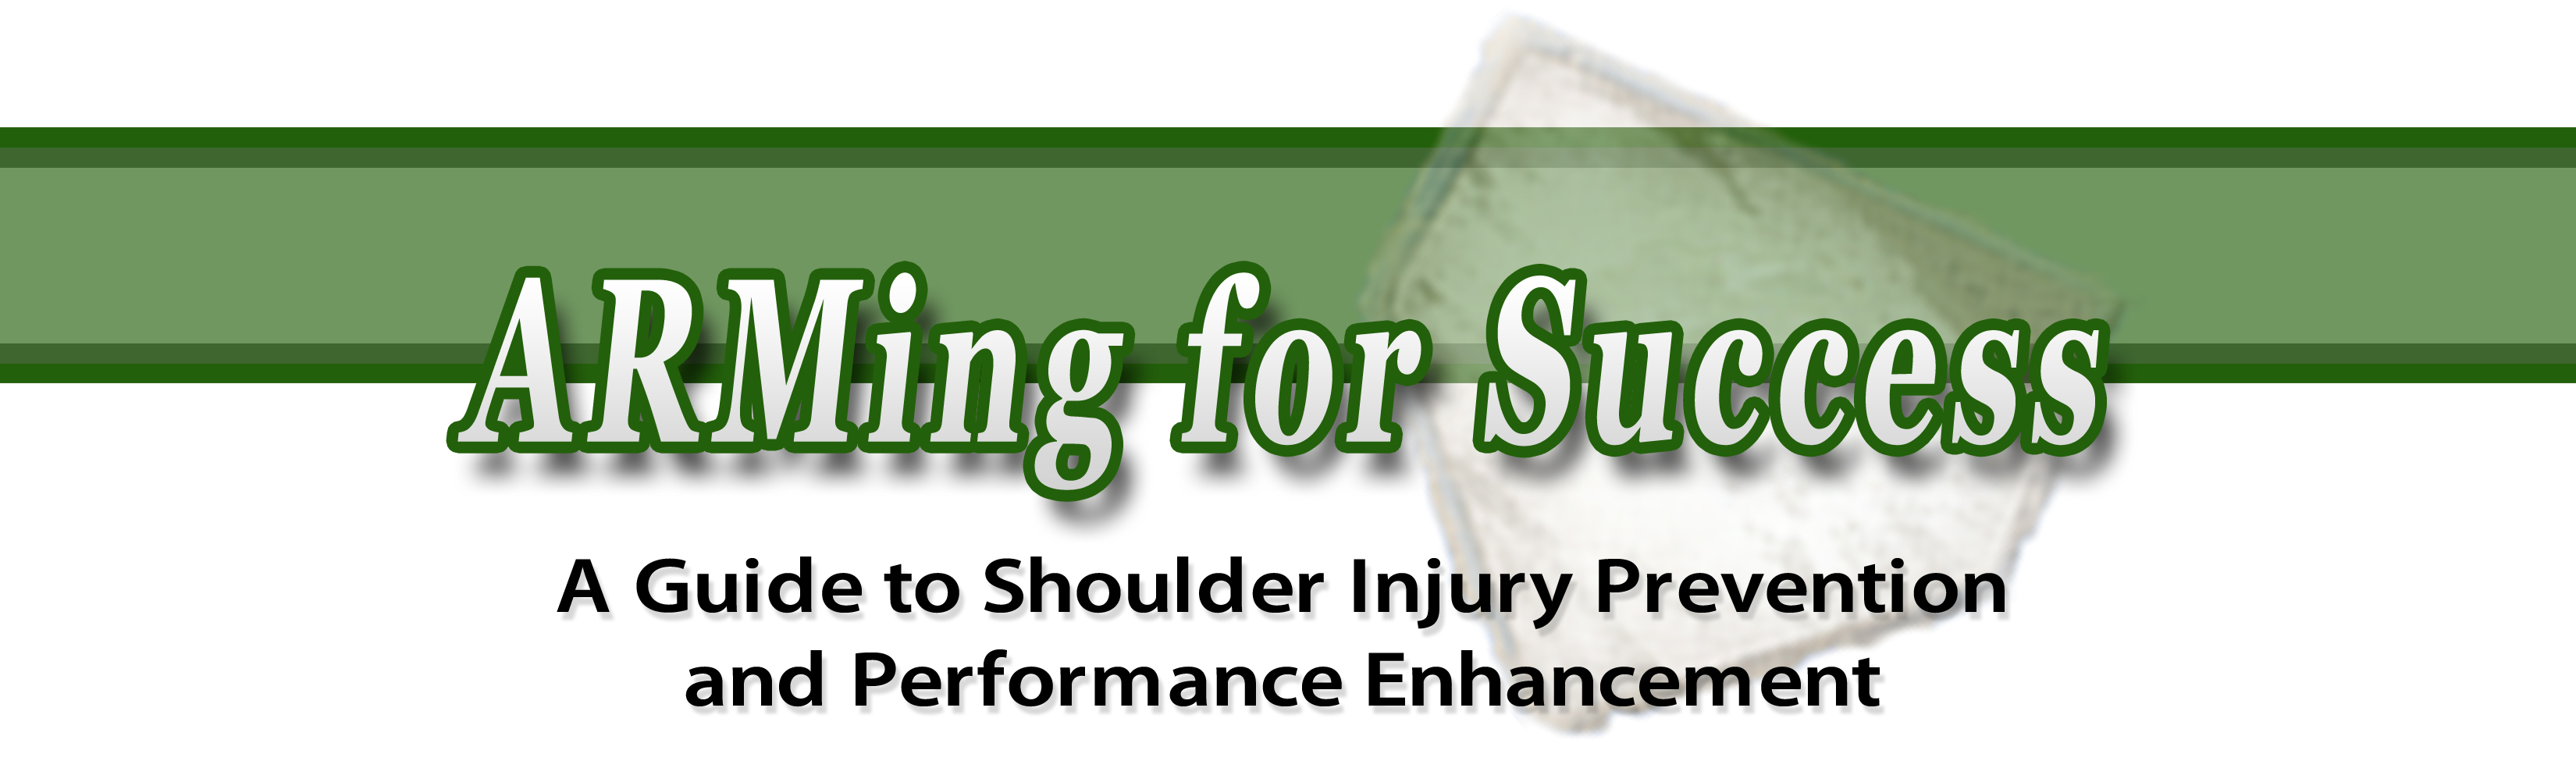 ARMing for Success: A Guide to Shoulder Injury Prevention and Performance Enhancement